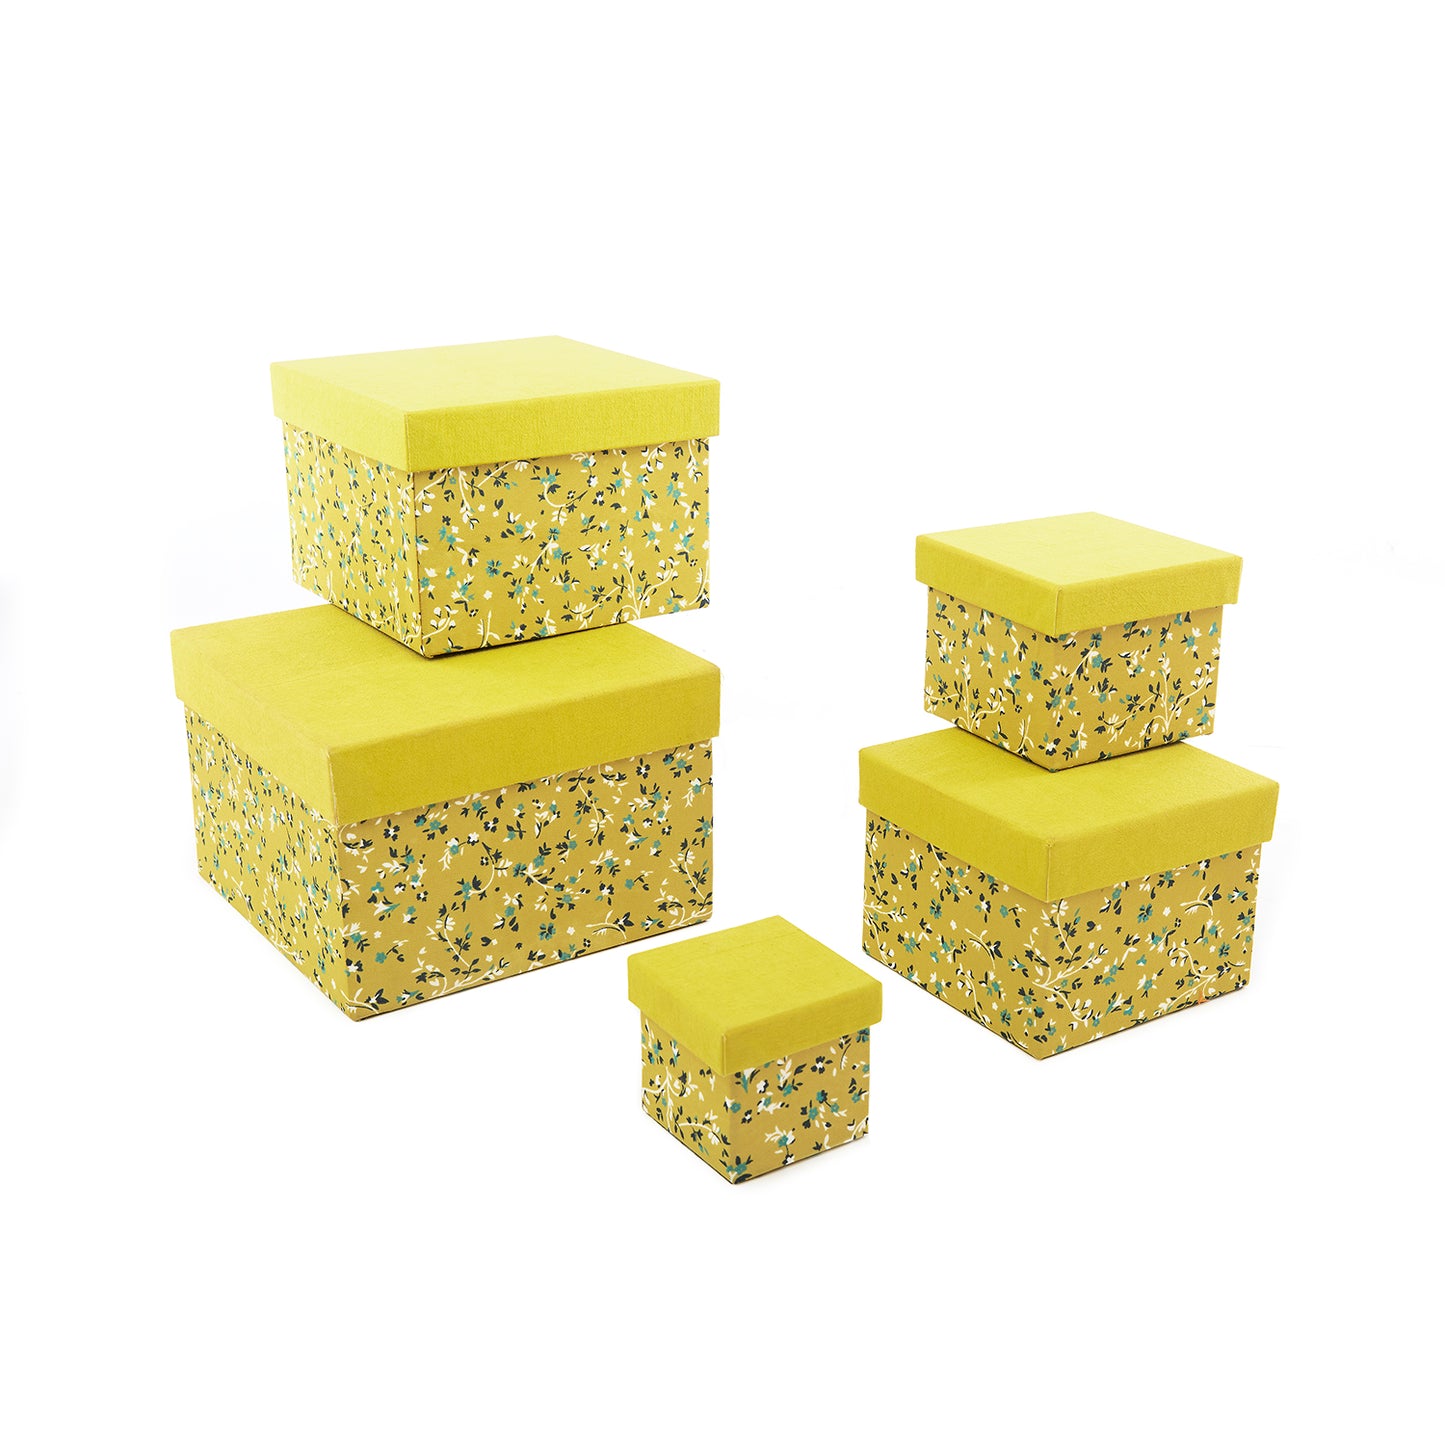 Spring Flower on a Canary Yellow - Gift Boxes Set of 5